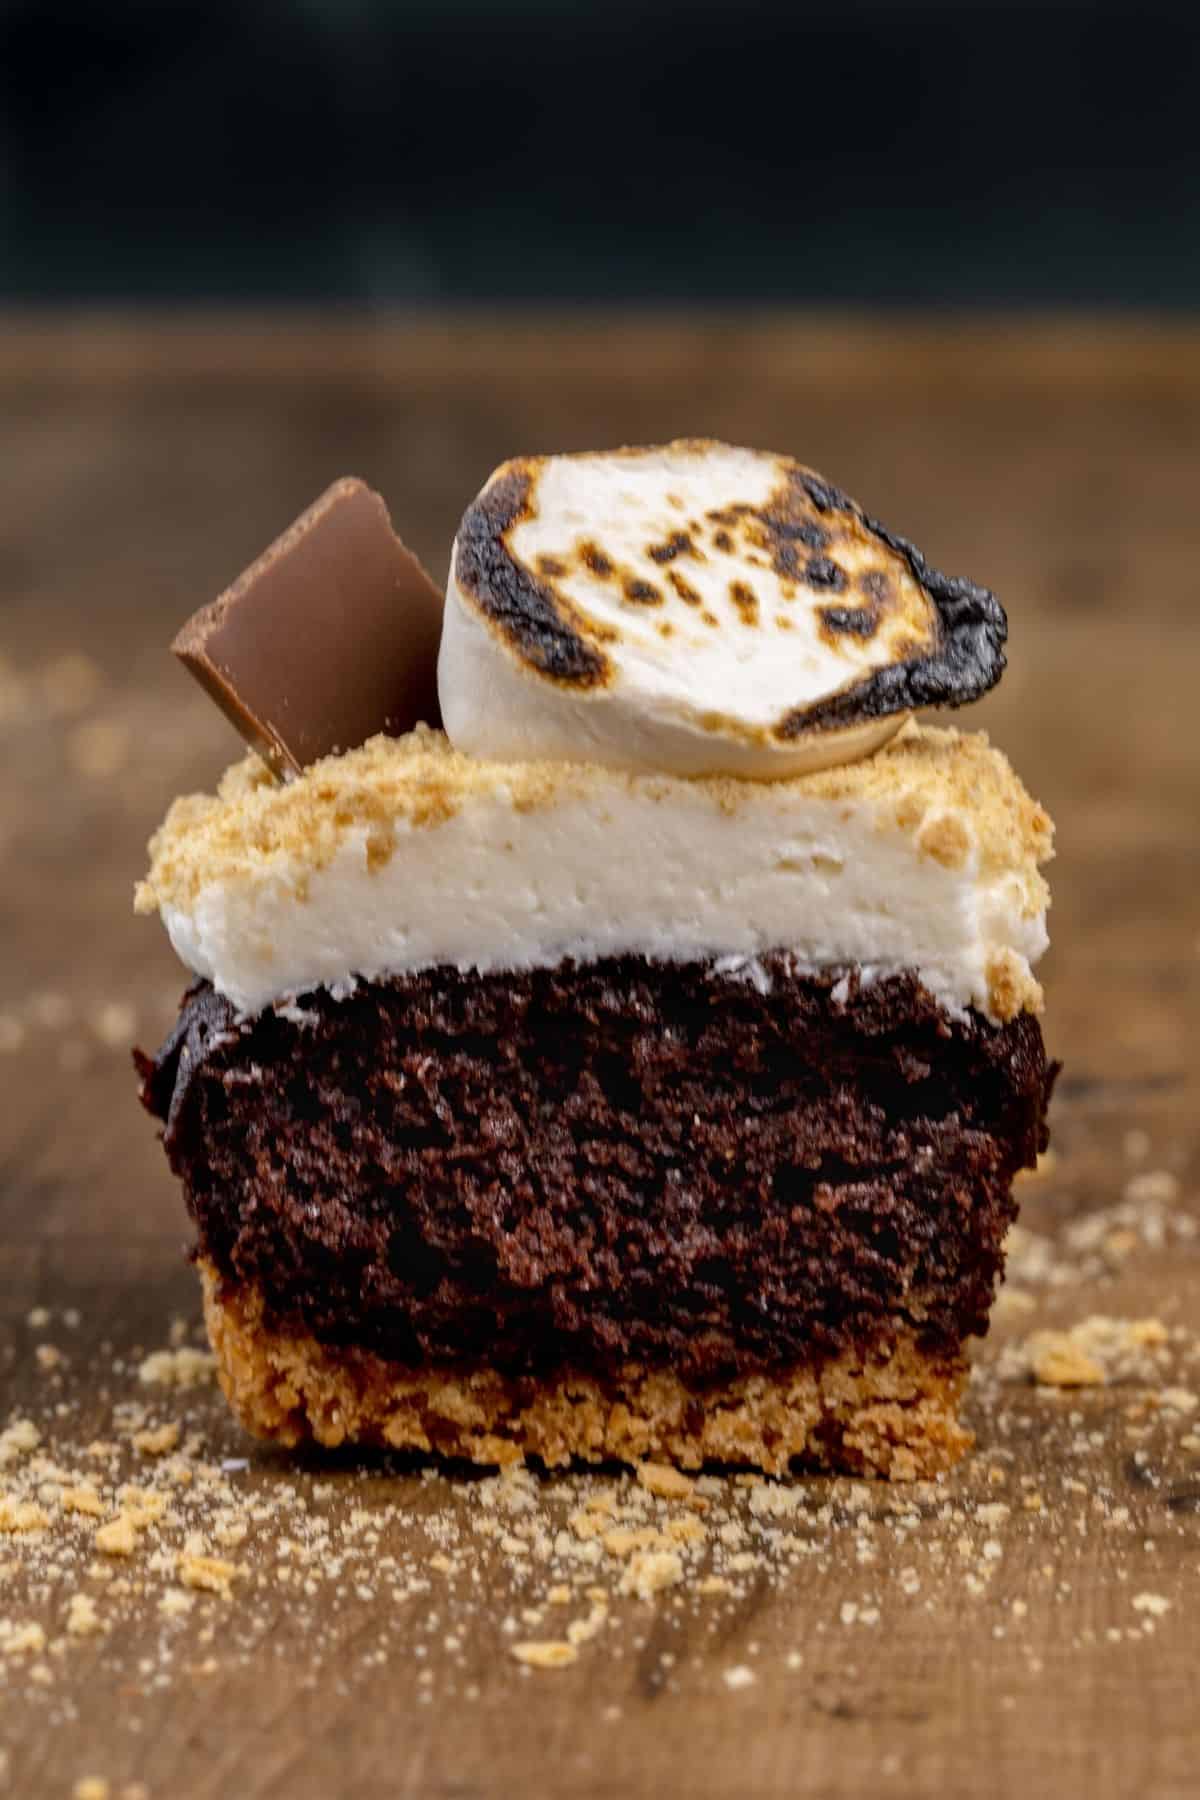 sliced view of a s'mores cupcake so you can see inside and the layers